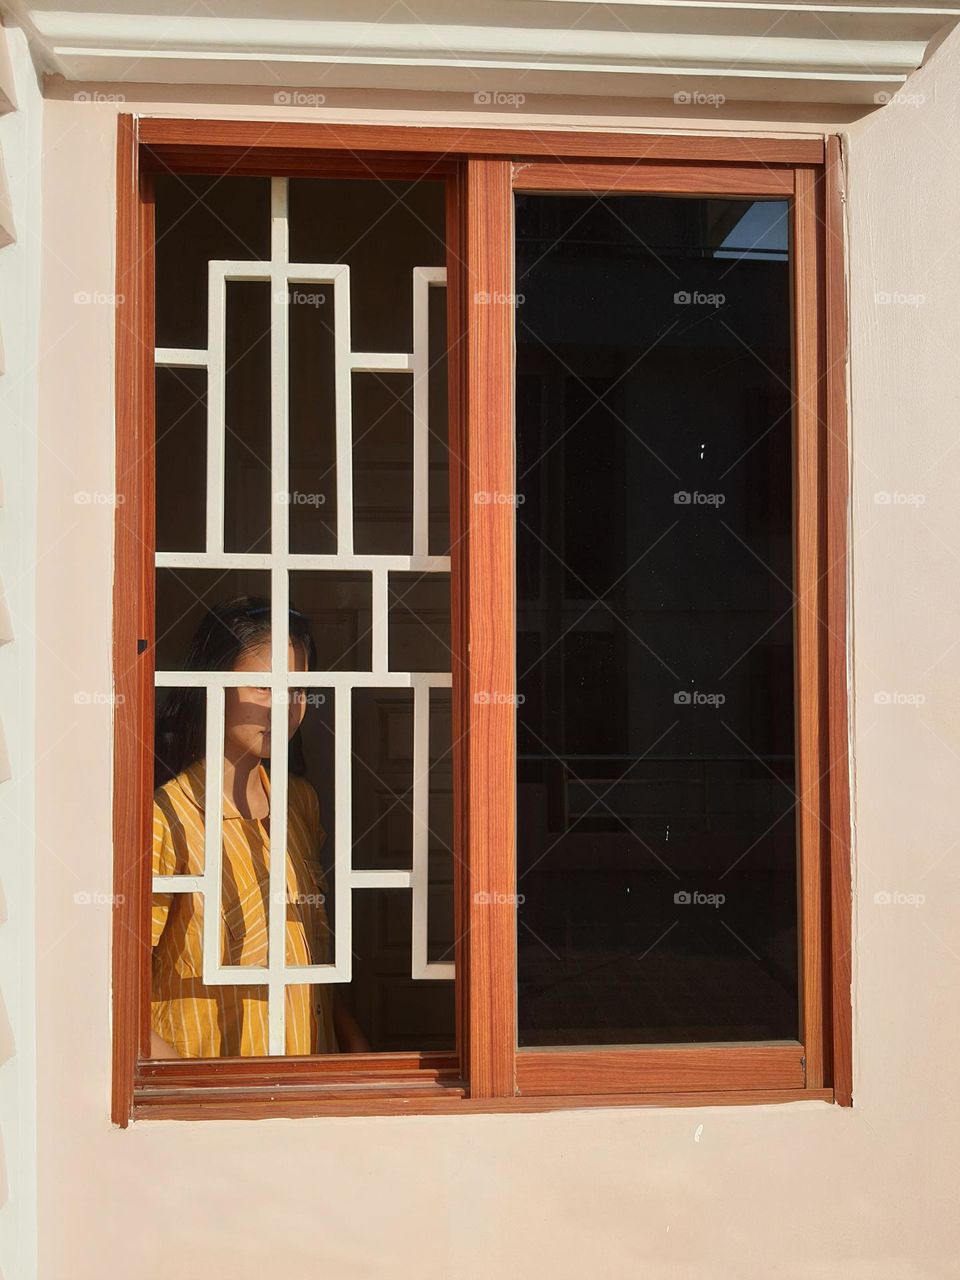 A person at the window